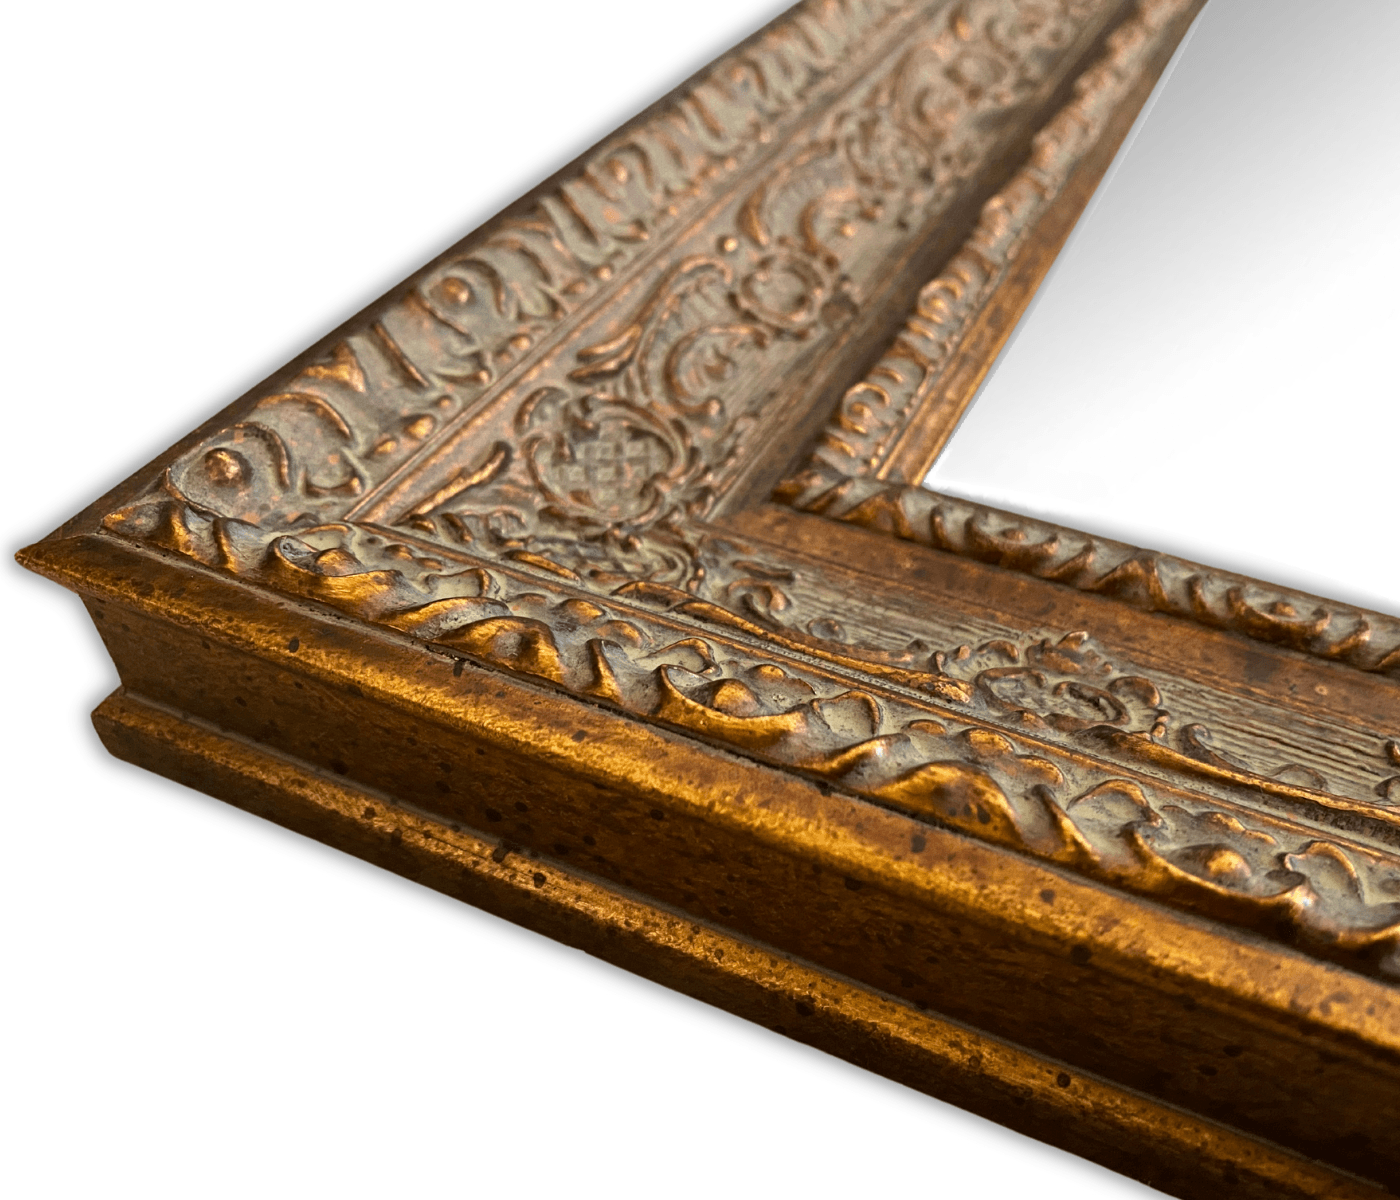 Parisienne Ornate Wood Framed Wall Mirror Antique Gold Patina Finish - West Frames